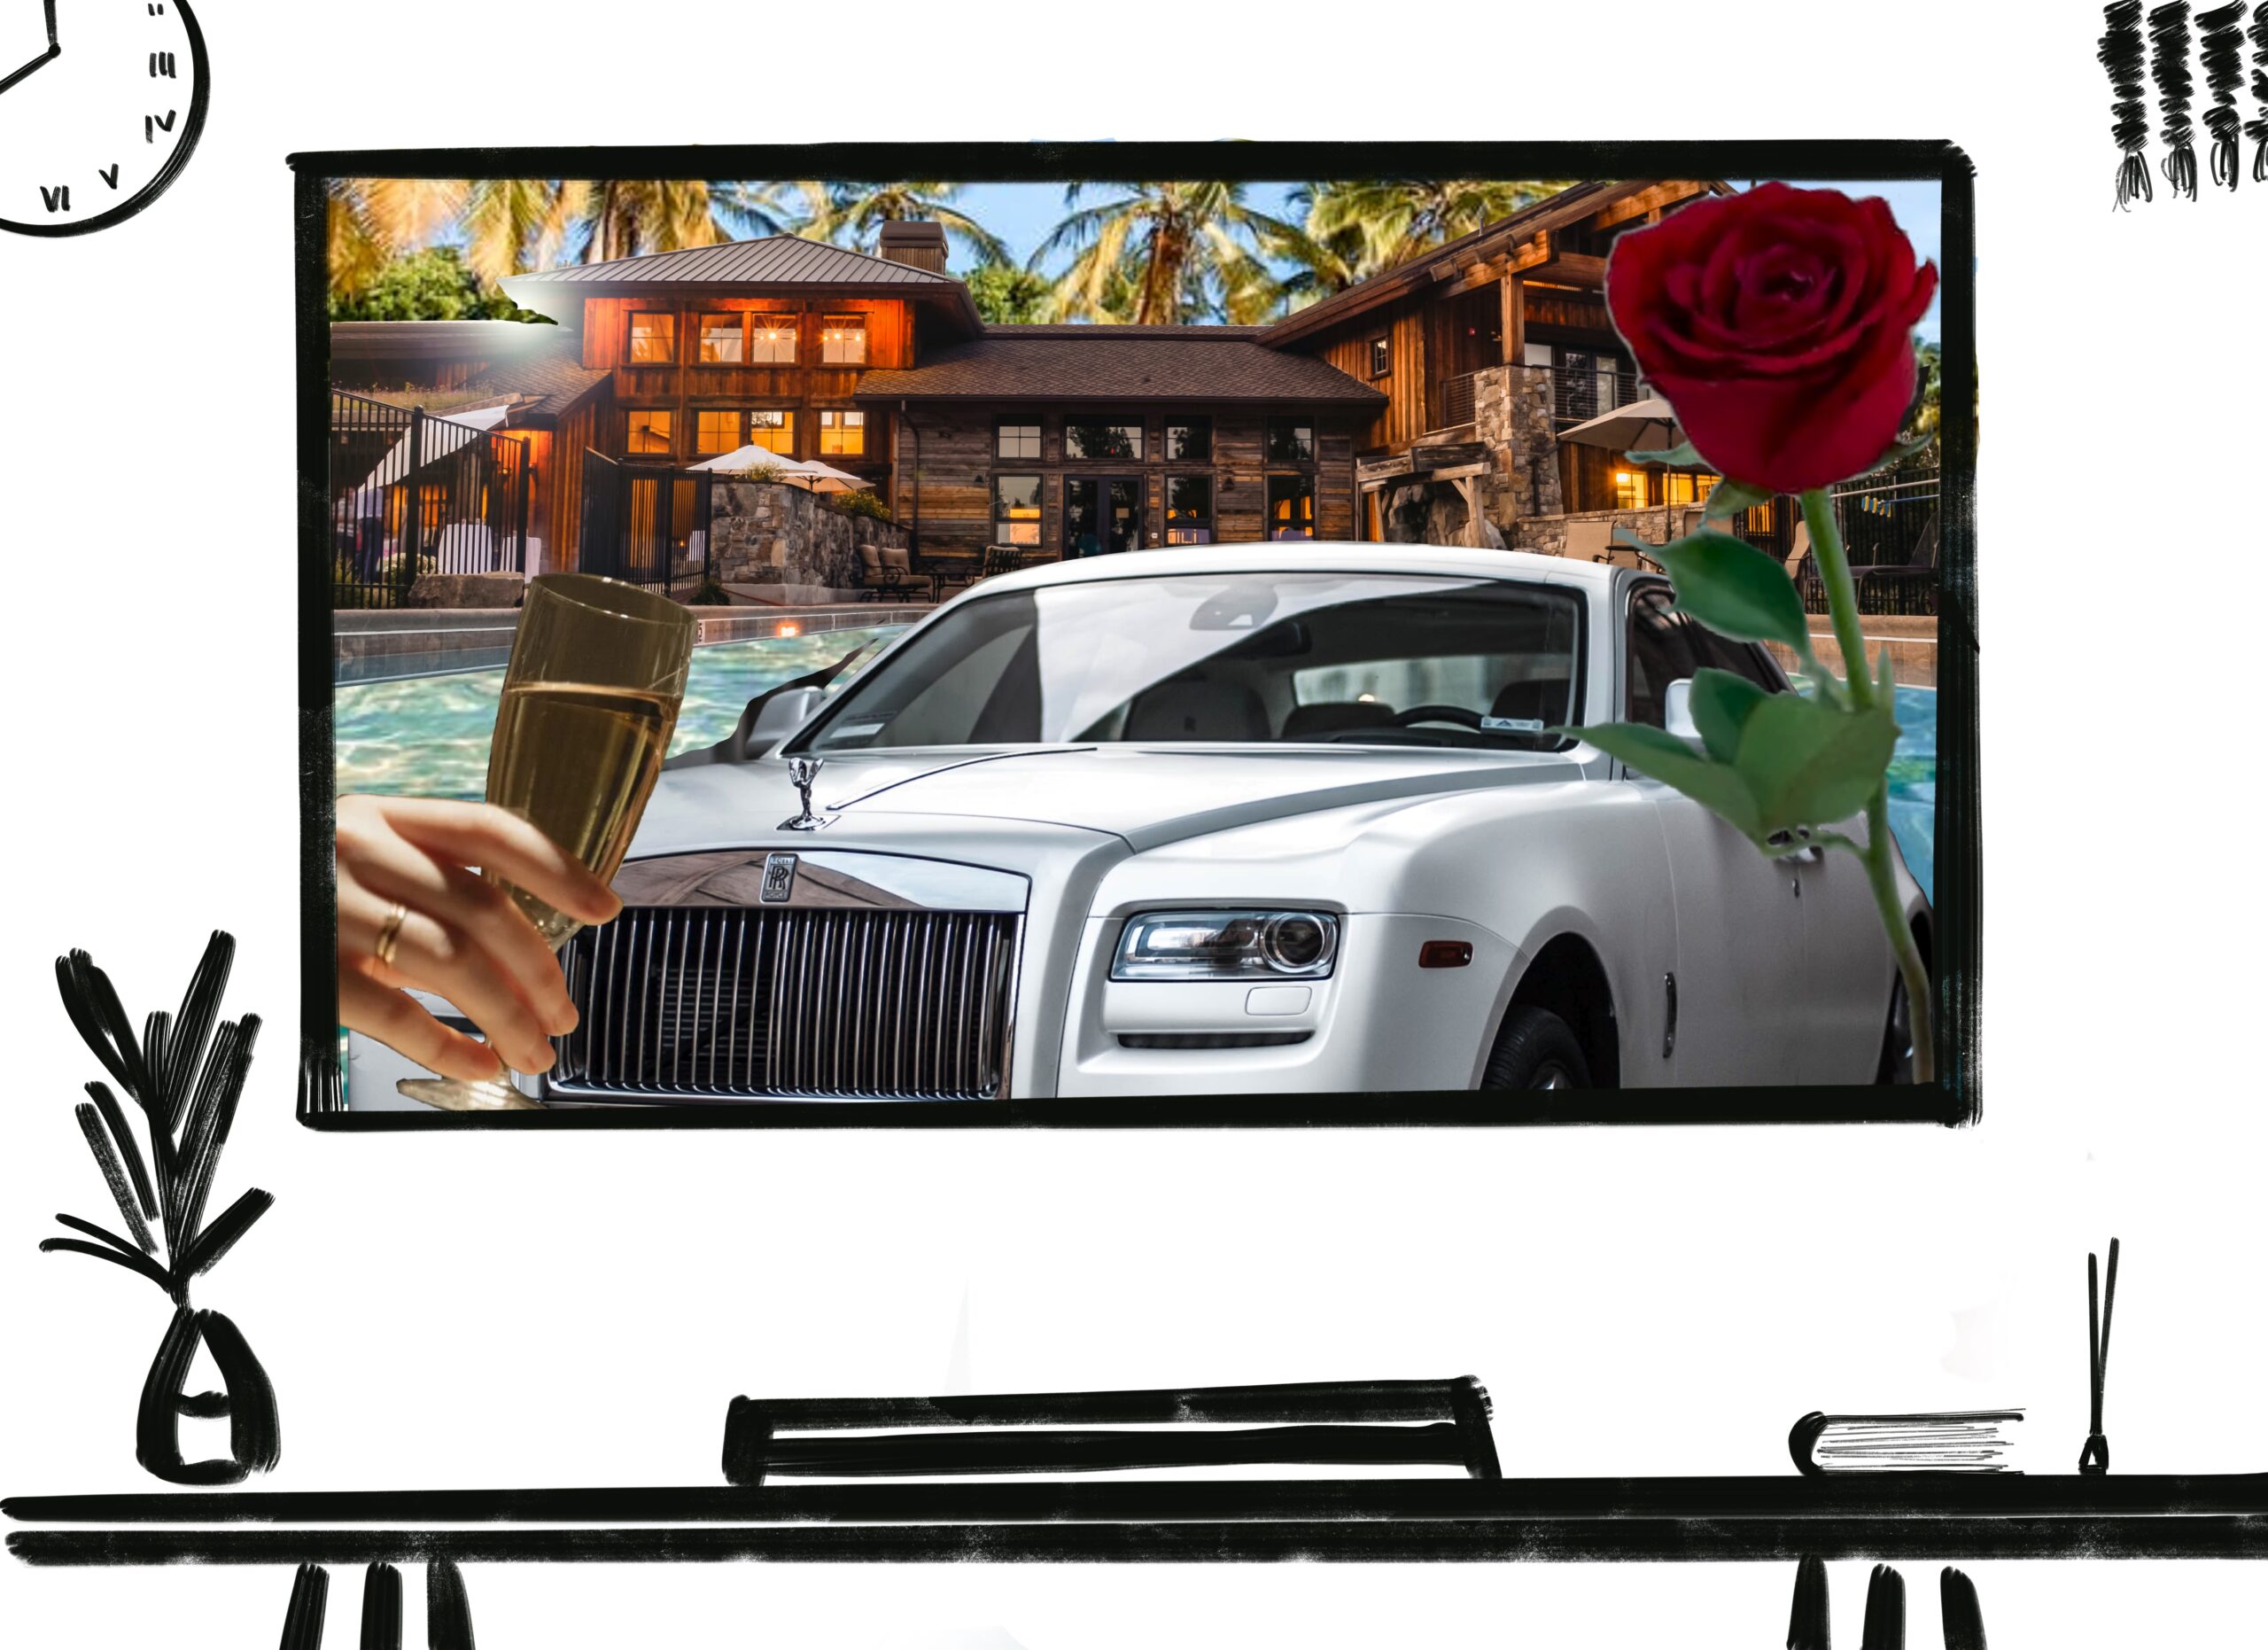 Collage of different elements of popular reality TVs - a mansion, a car, a single rose, a hand holding a glass of champagne - inside the black outline of a TV, along with outlines of a desk, a houseplant, a speaker, some incense sticks.